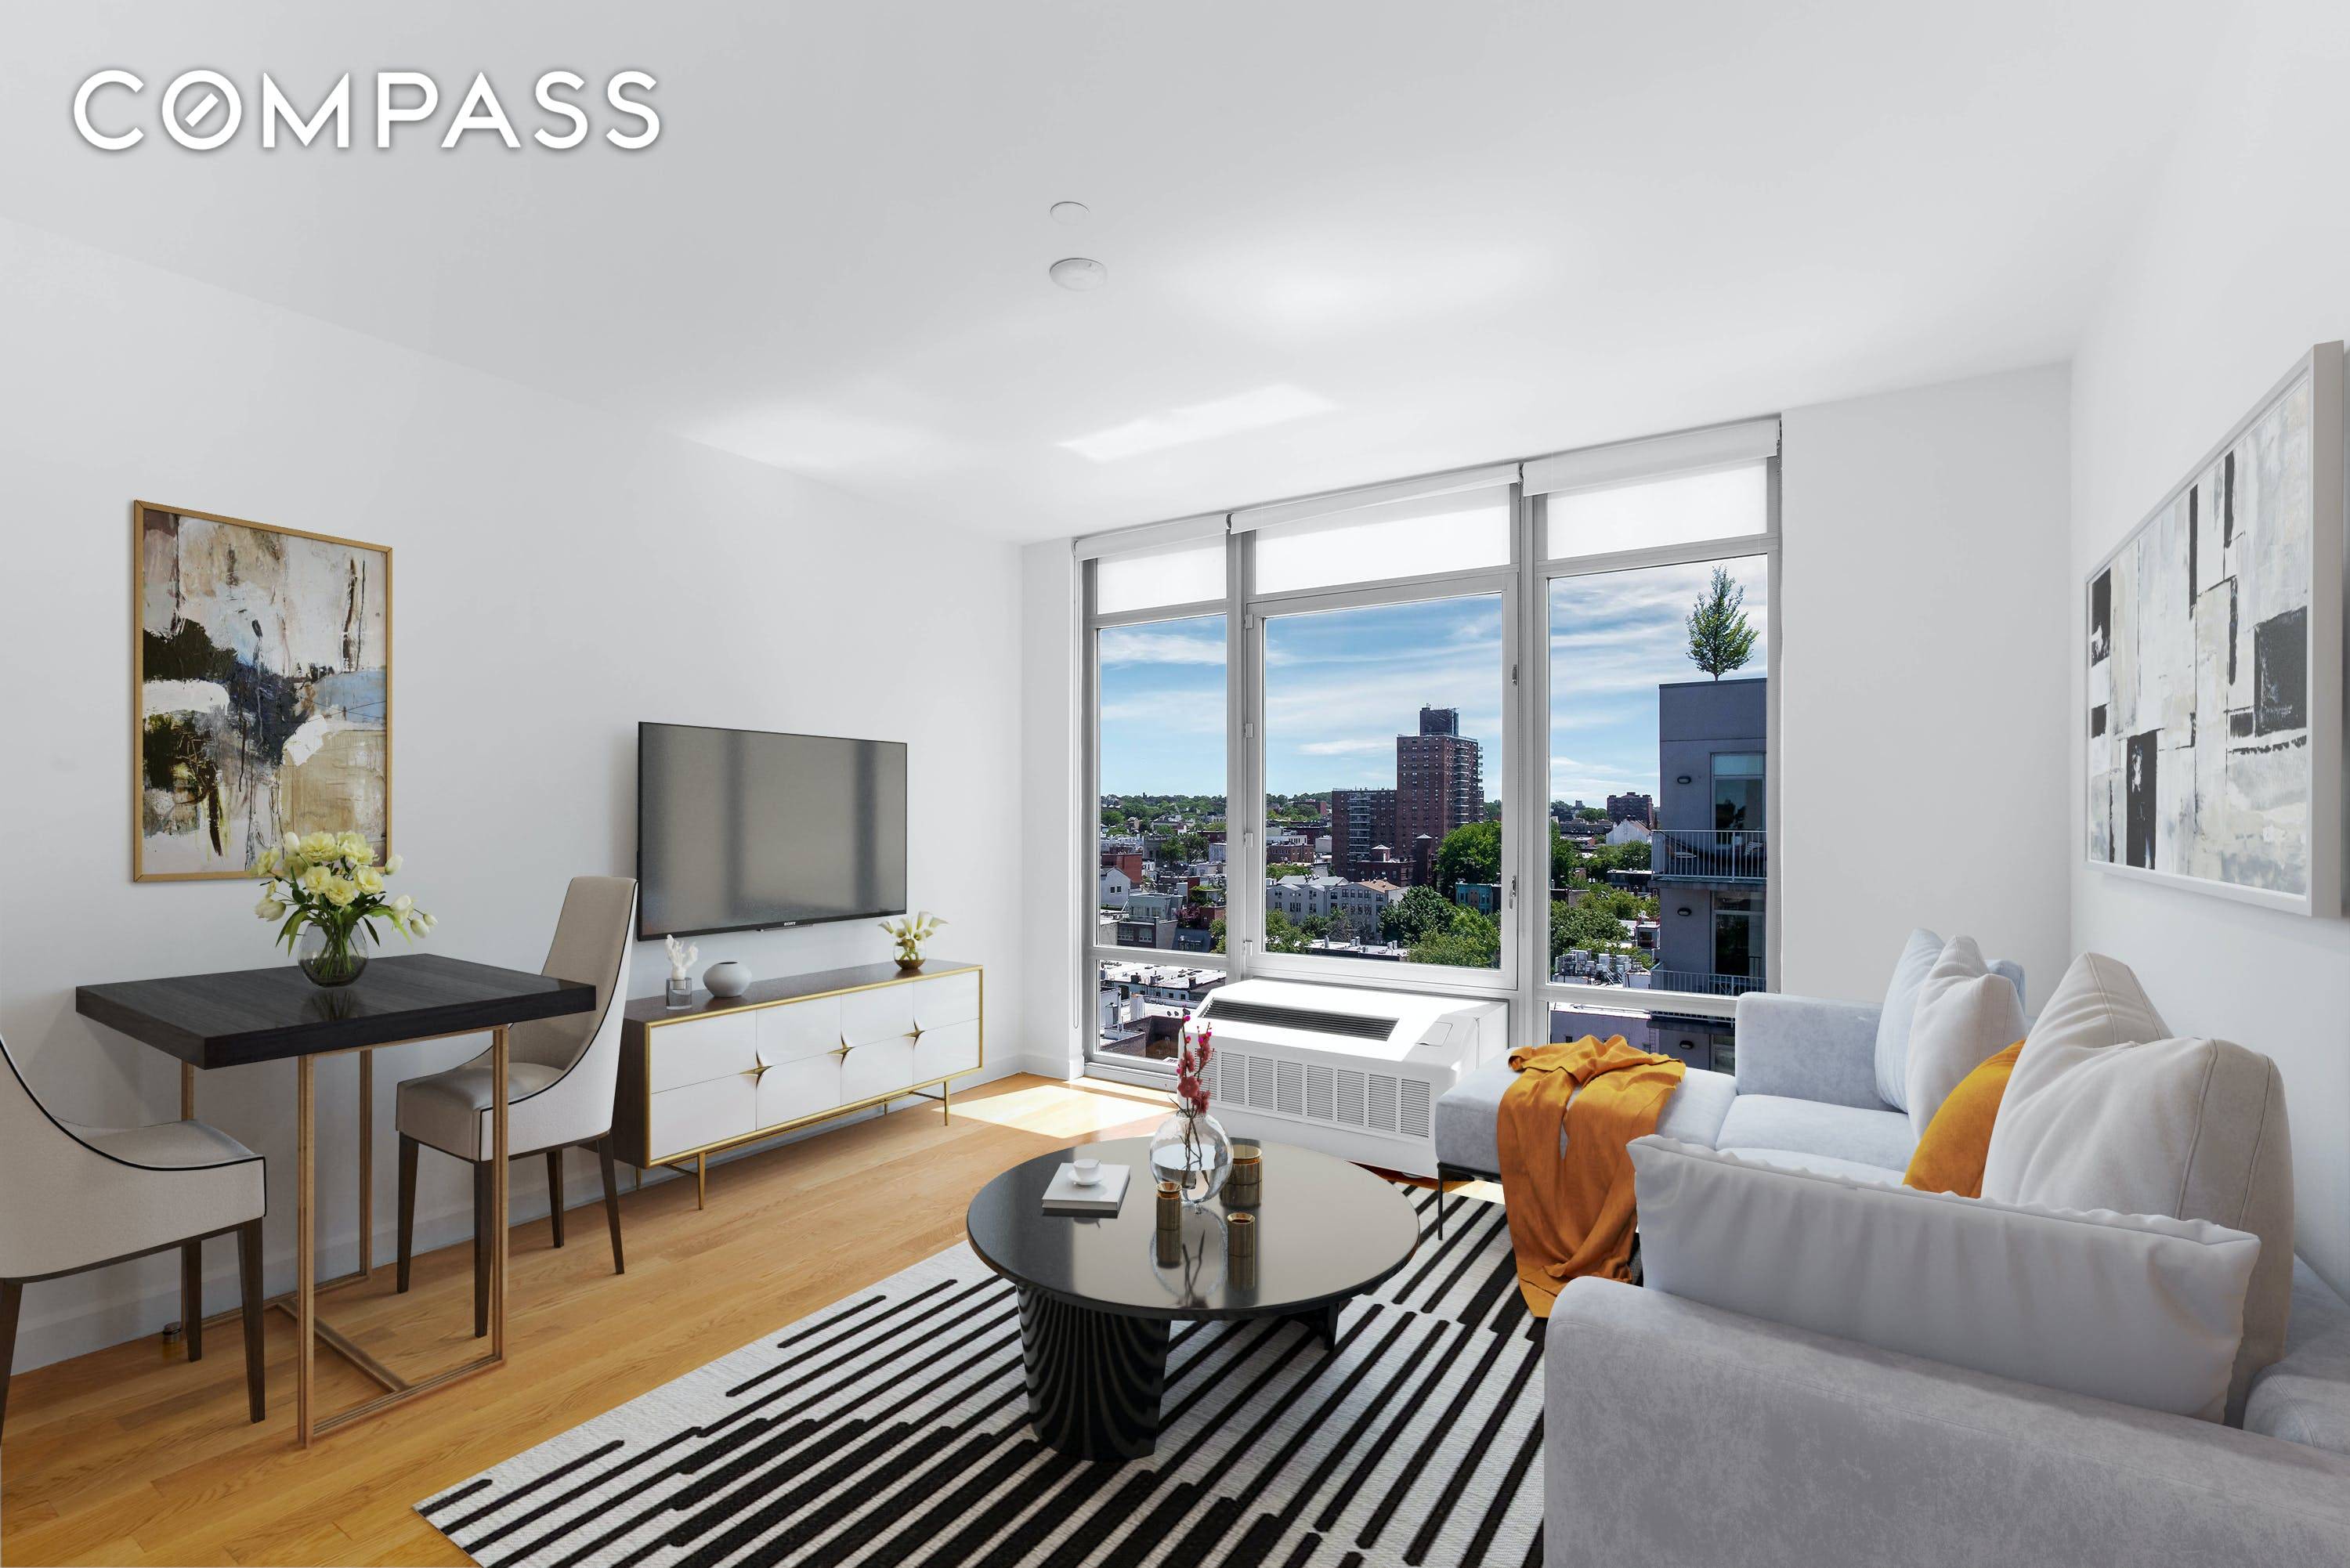 Park Slope The Landmark Large 1BD with Floor To Ceiling Windows, City Views, Gourmet Kitchen with Stainless Steel Appliances, Washer Dryer in a Luxury Doorman Building with Roof Deck, Lounge, ...